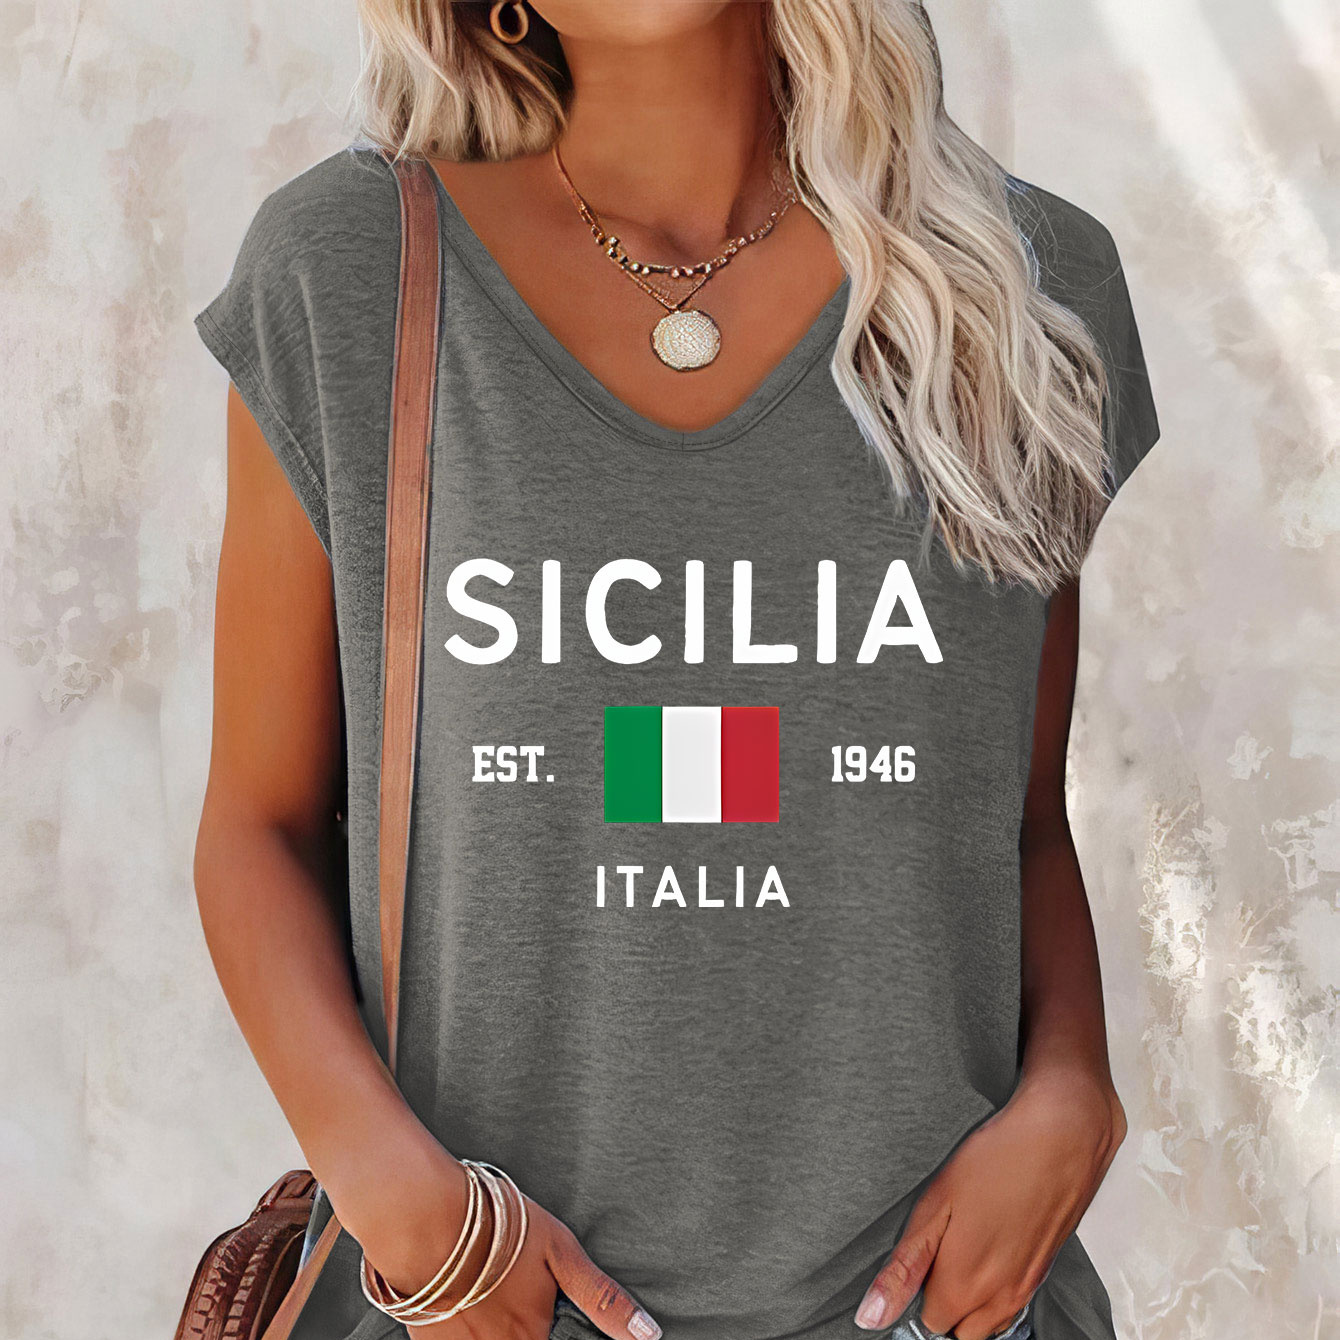 

Sicilia Print V Neck Tank Top, Casual Sleeveless Top For Summer & Spring, Women's Clothing